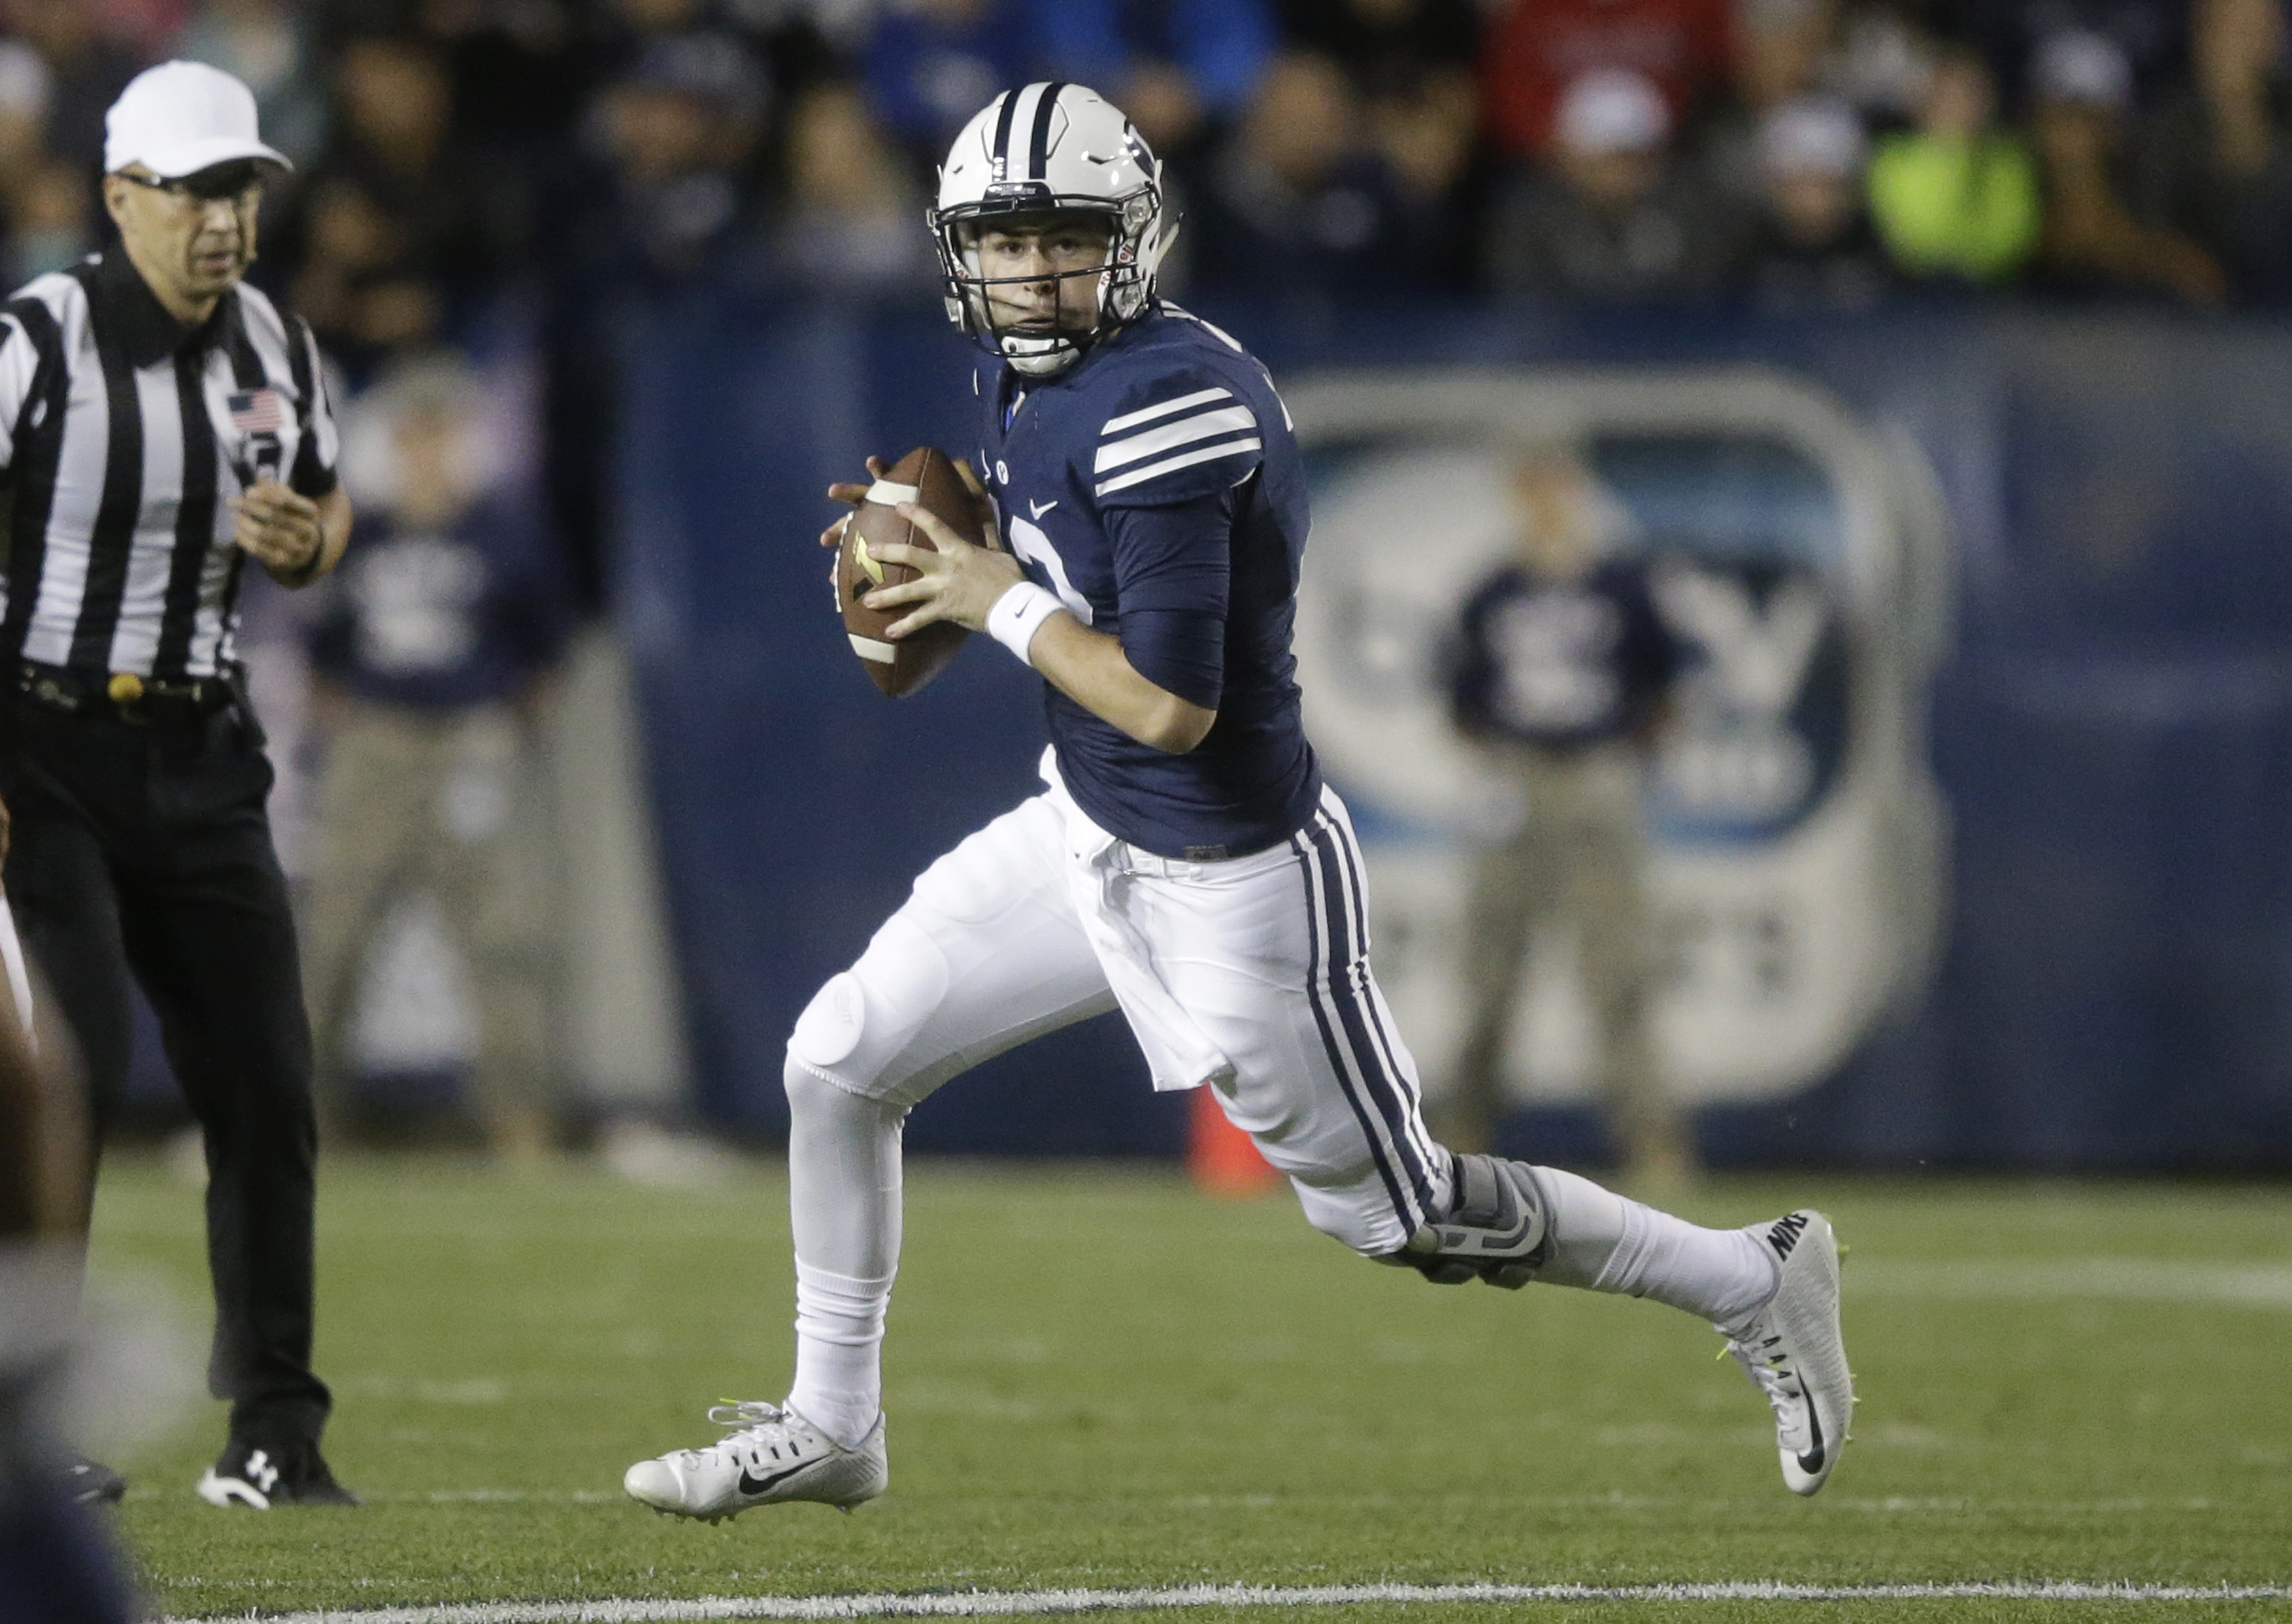 Byu Overes Turnovers To Beat Uconn Wtop